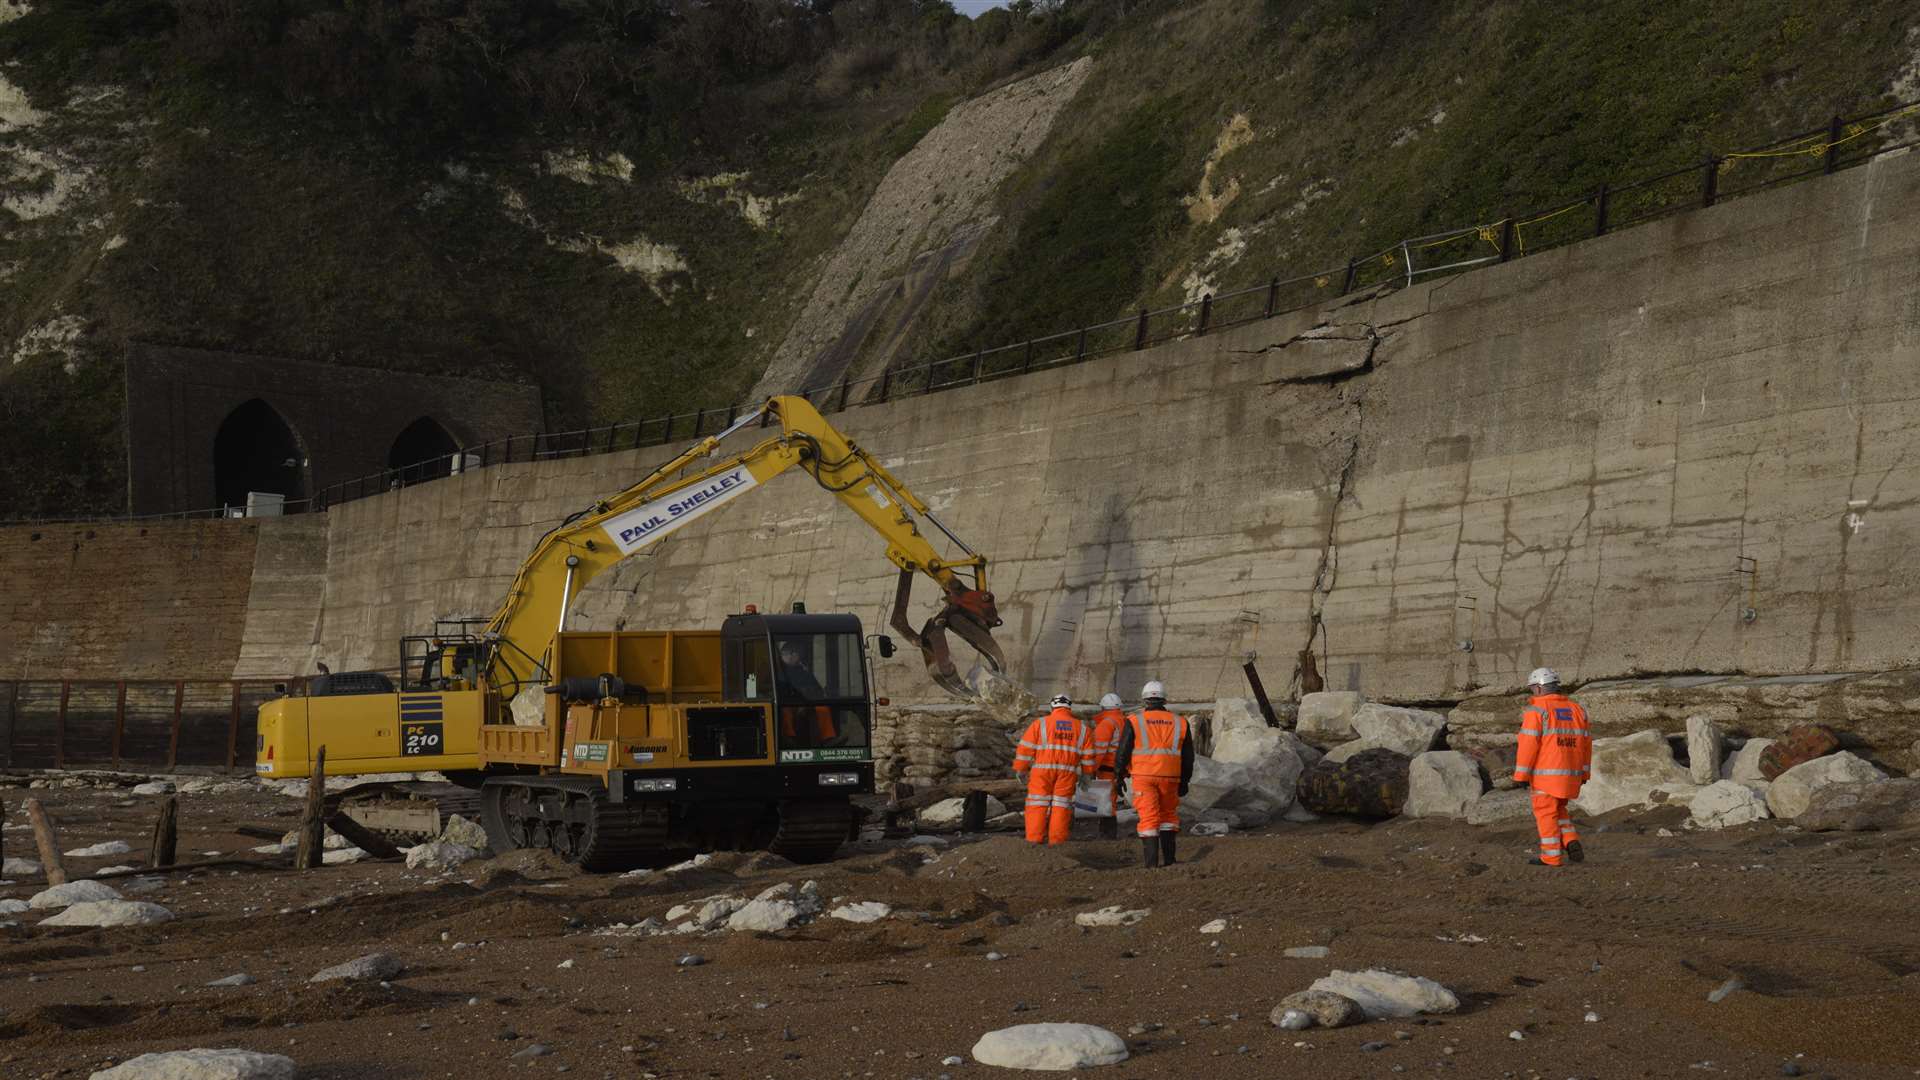 The damaged sea wall and railway embankment near Shakespeare Cliff tunnel between Dover and Folkestone